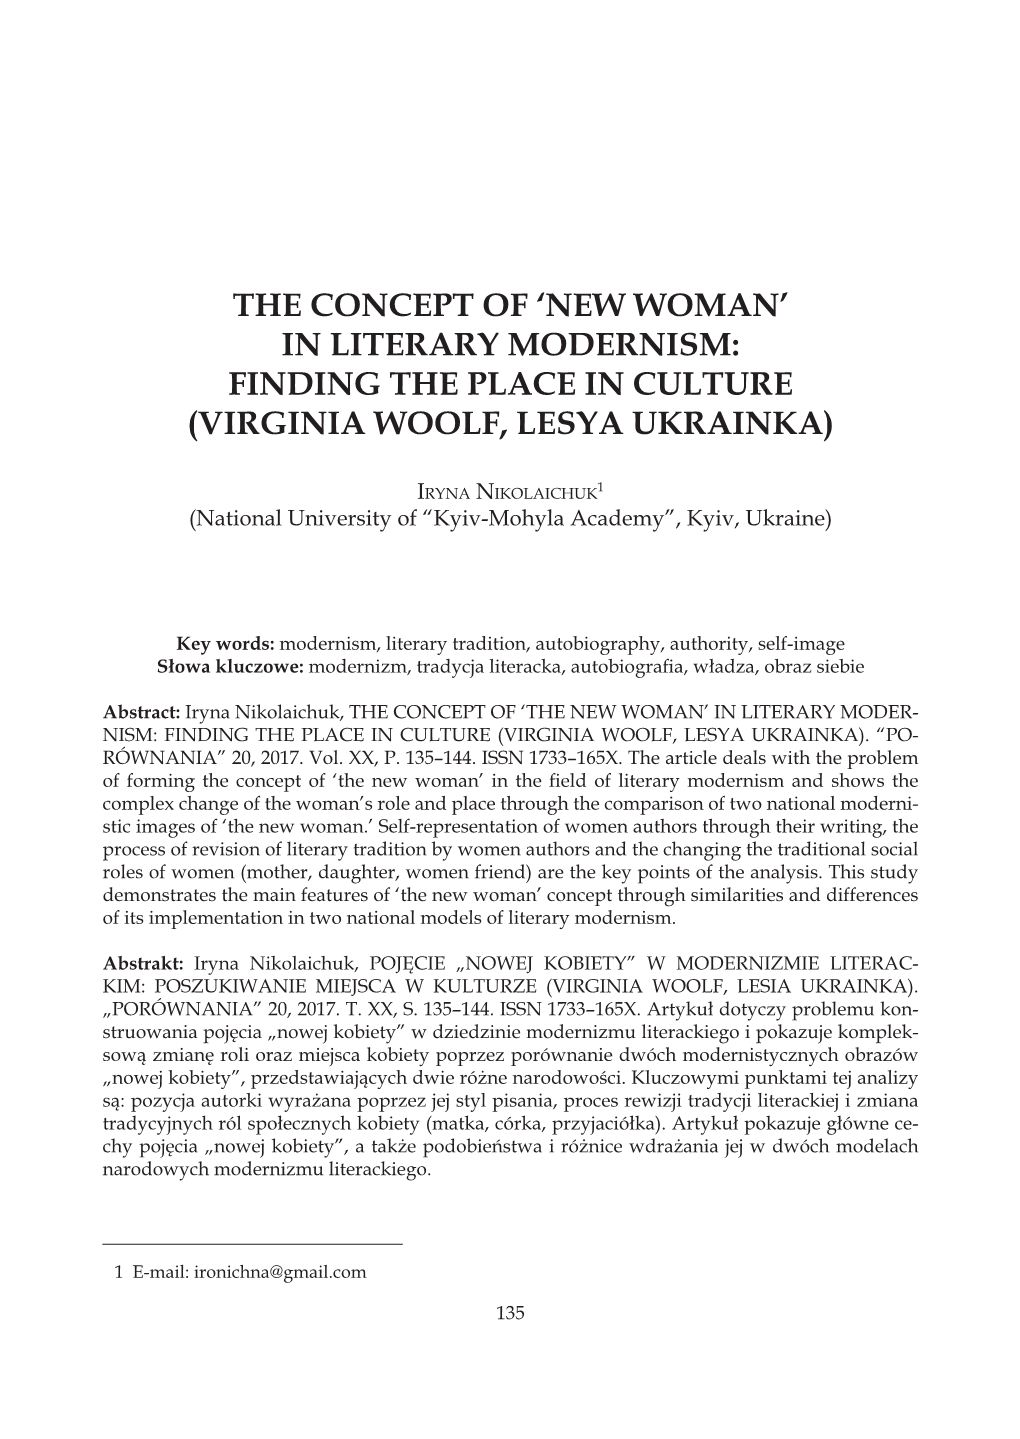 Finding the Place in Culture (Virginia Woolf, Lesya Ukrainka)